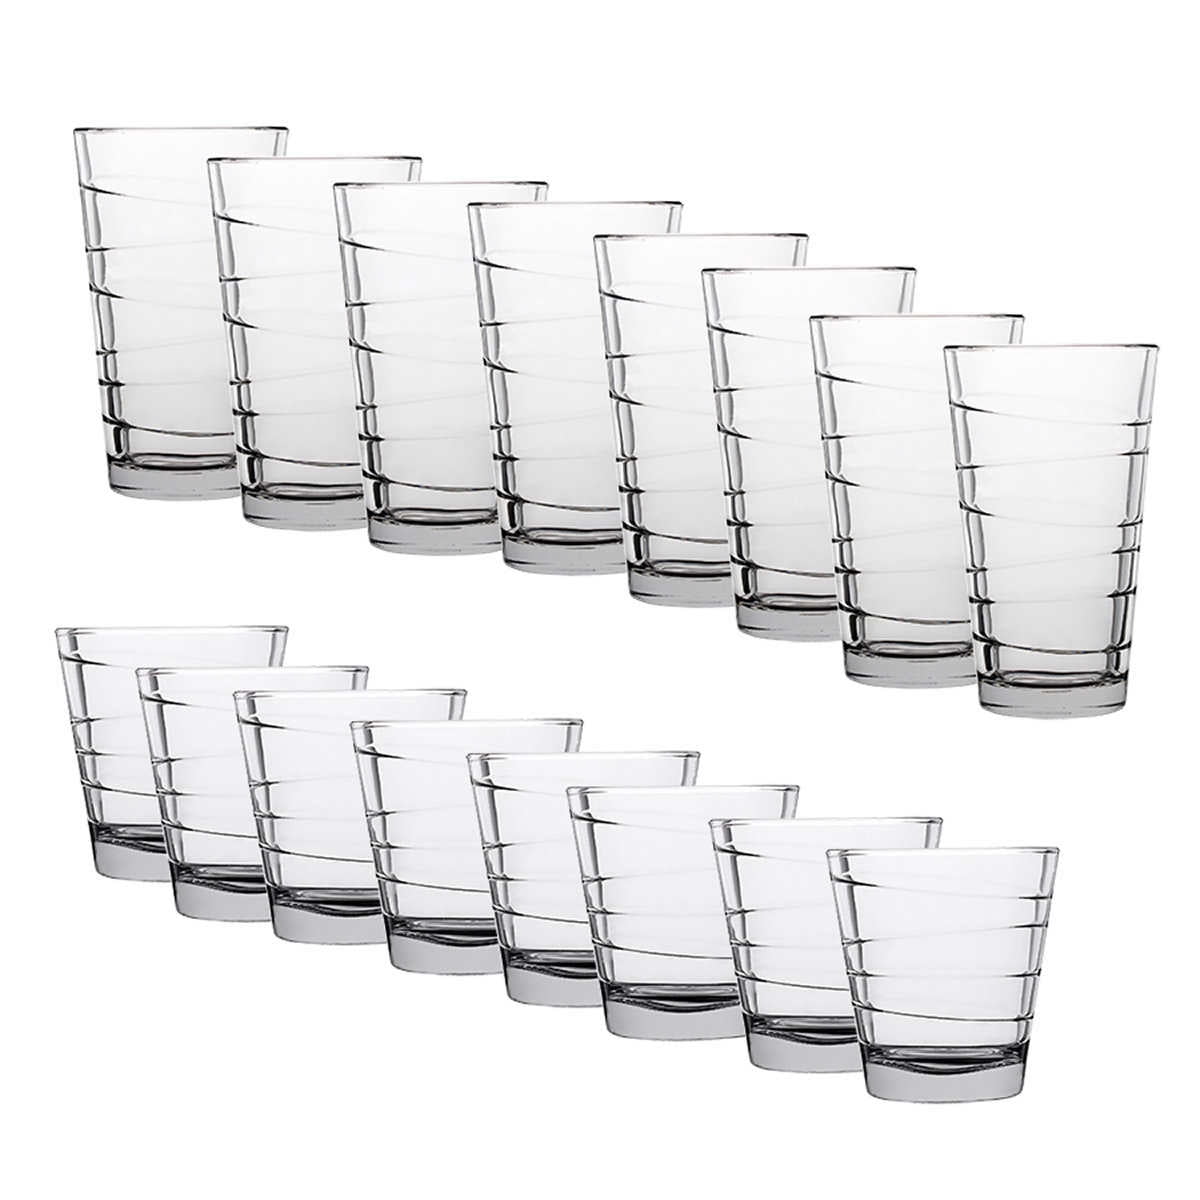 Anchor Hocking Rio 16-Piece Drinkware Set, Size: 8-10.5 oz and 8-16oz, Clear